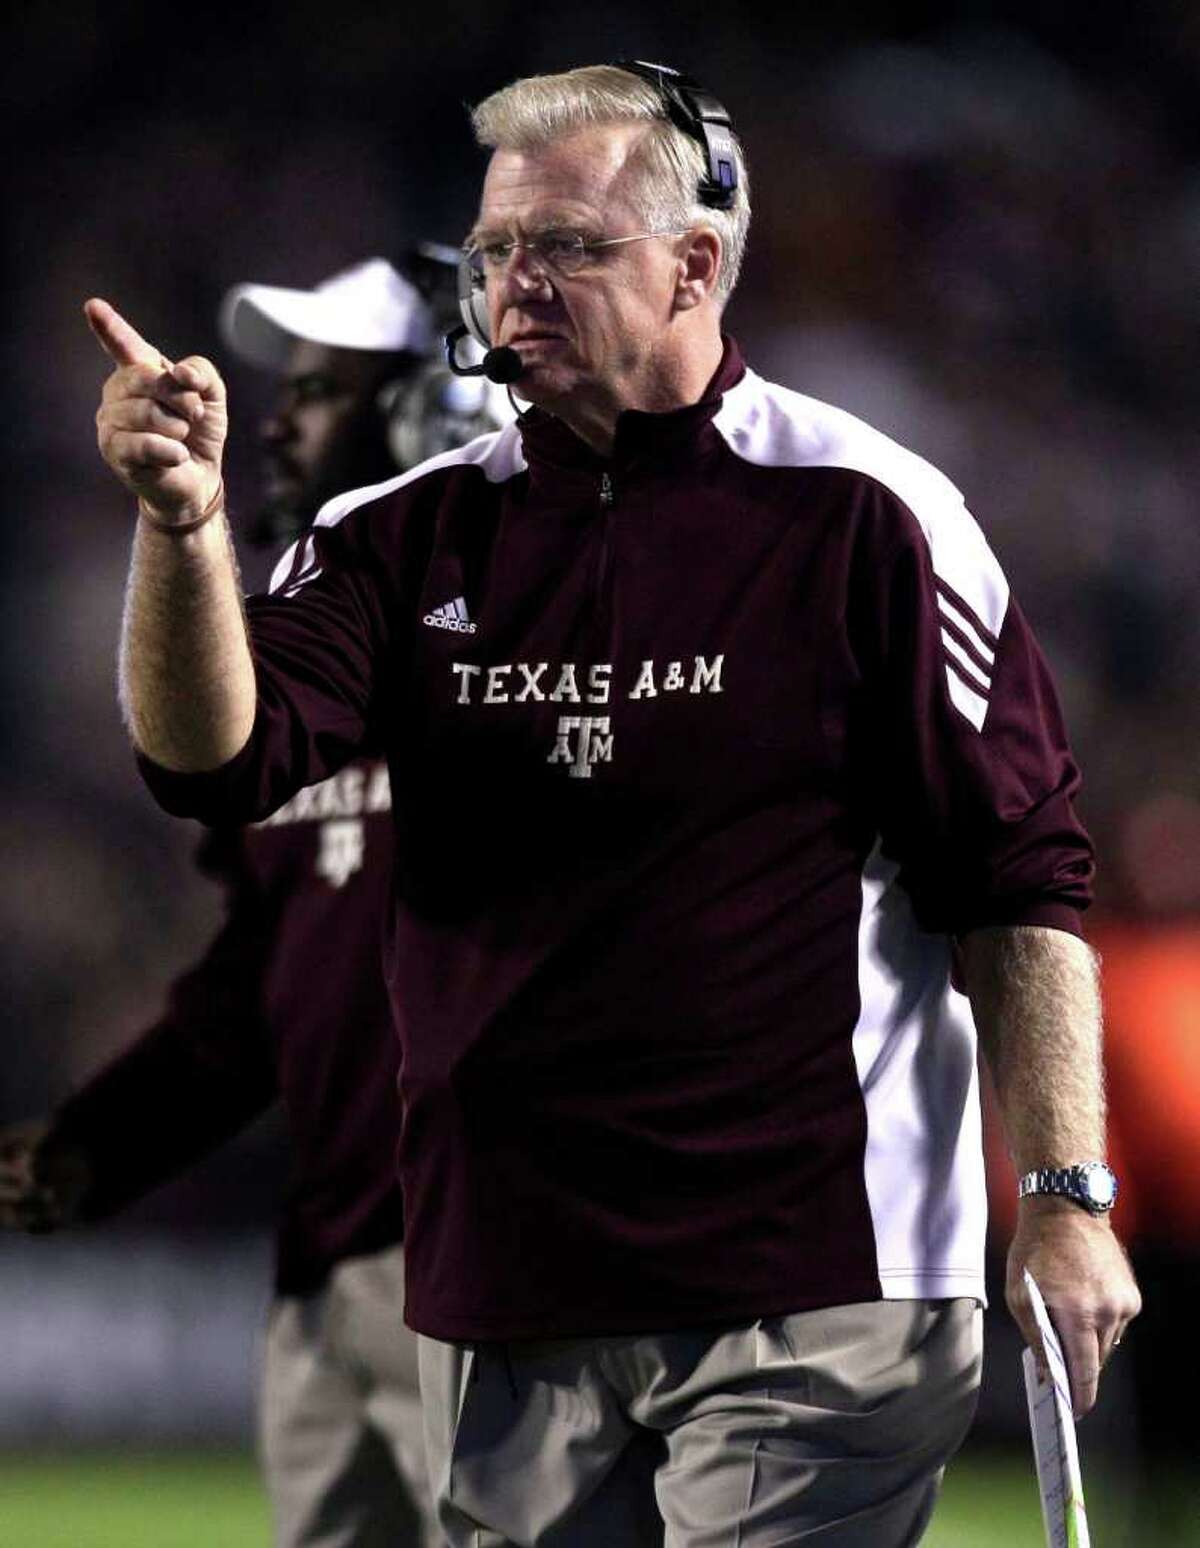 Texas A&M head coach Mike Sherman calls out a play during the first quarter of an NCAA college football game at Kyle Field Thursday, Nov. 24, 2011, in College Station.